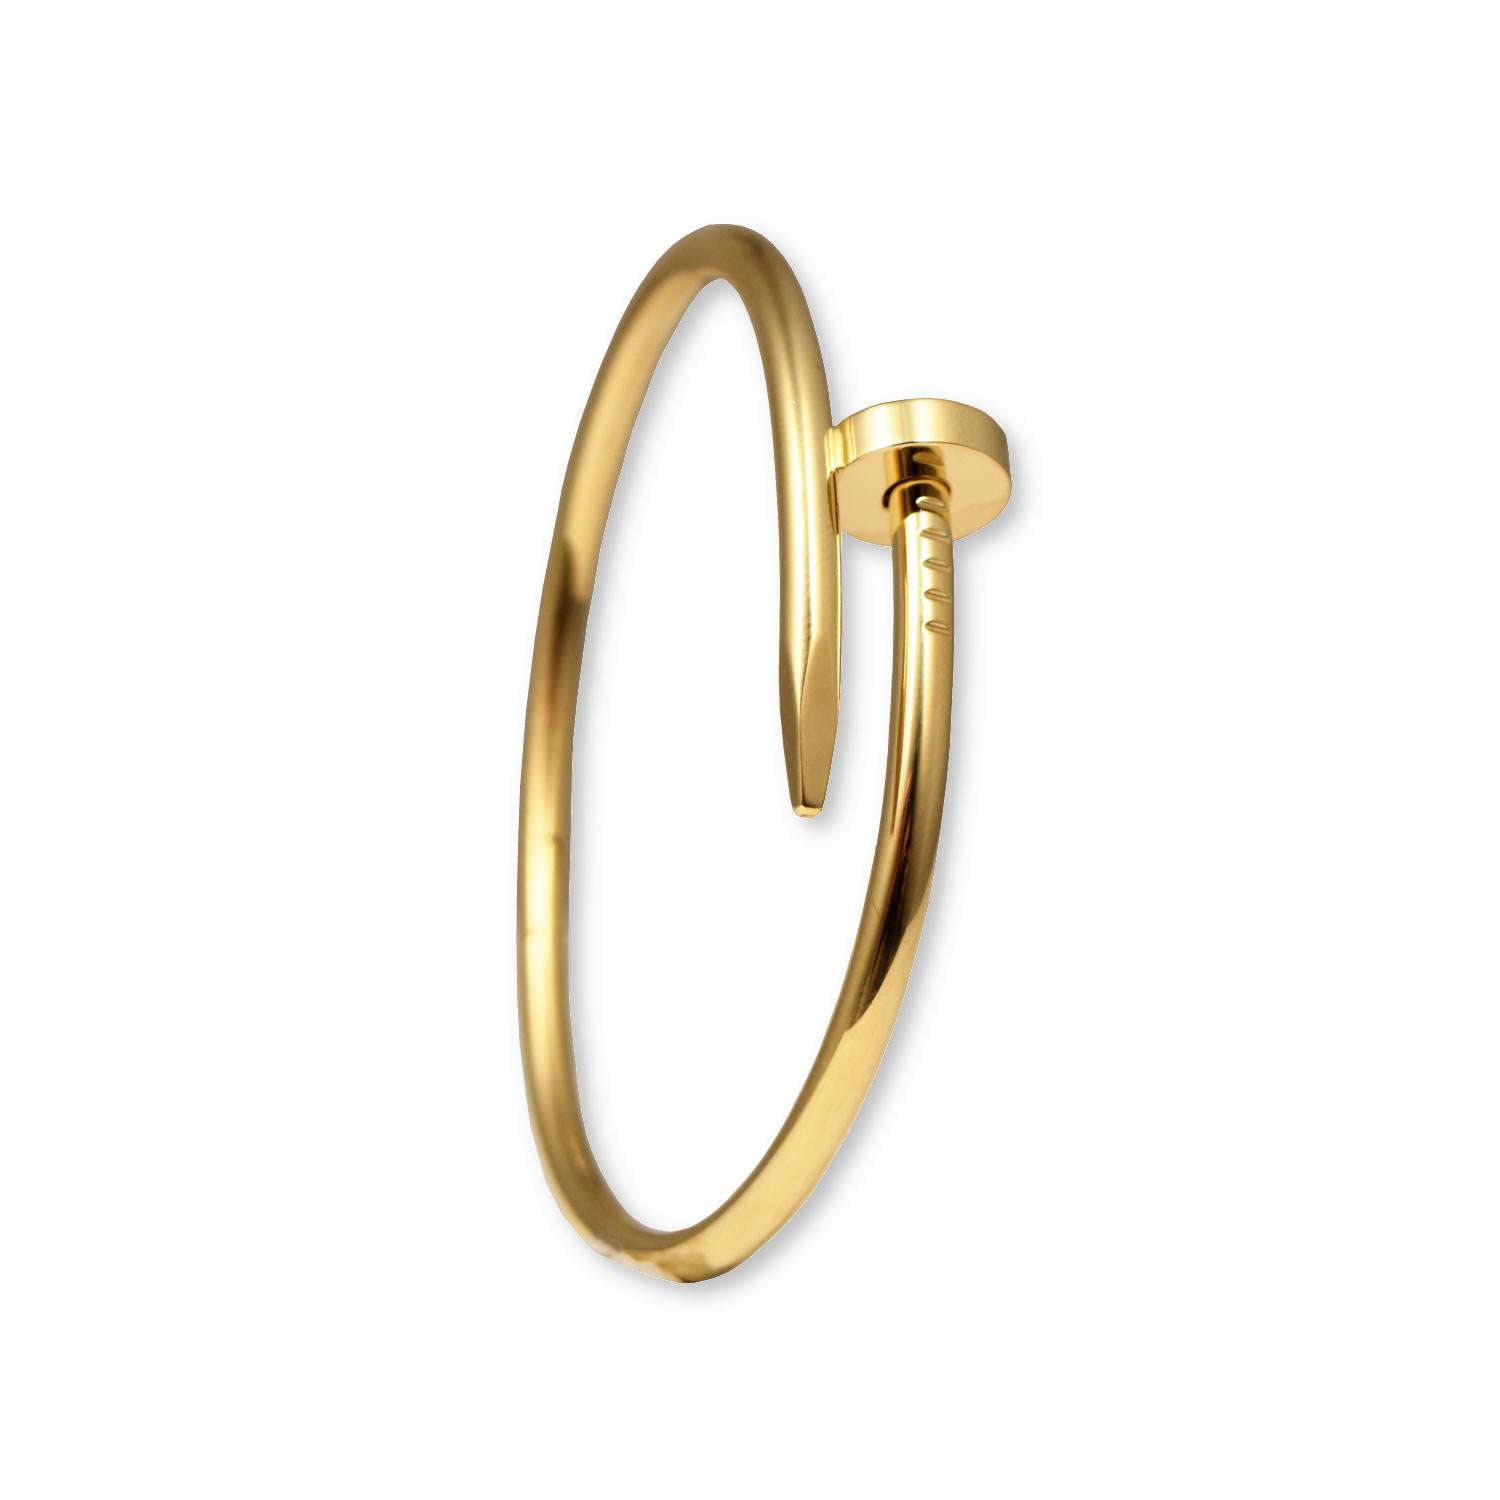 Born in 1970s New York, from the brilliant designer Aldo Cipullo, the Juste un Clou bracelet is bold, modern and incredibly creative. Juste un Clou is a creative twist on a familiar object. This jewelry  piece is made to wear and love everyday. For